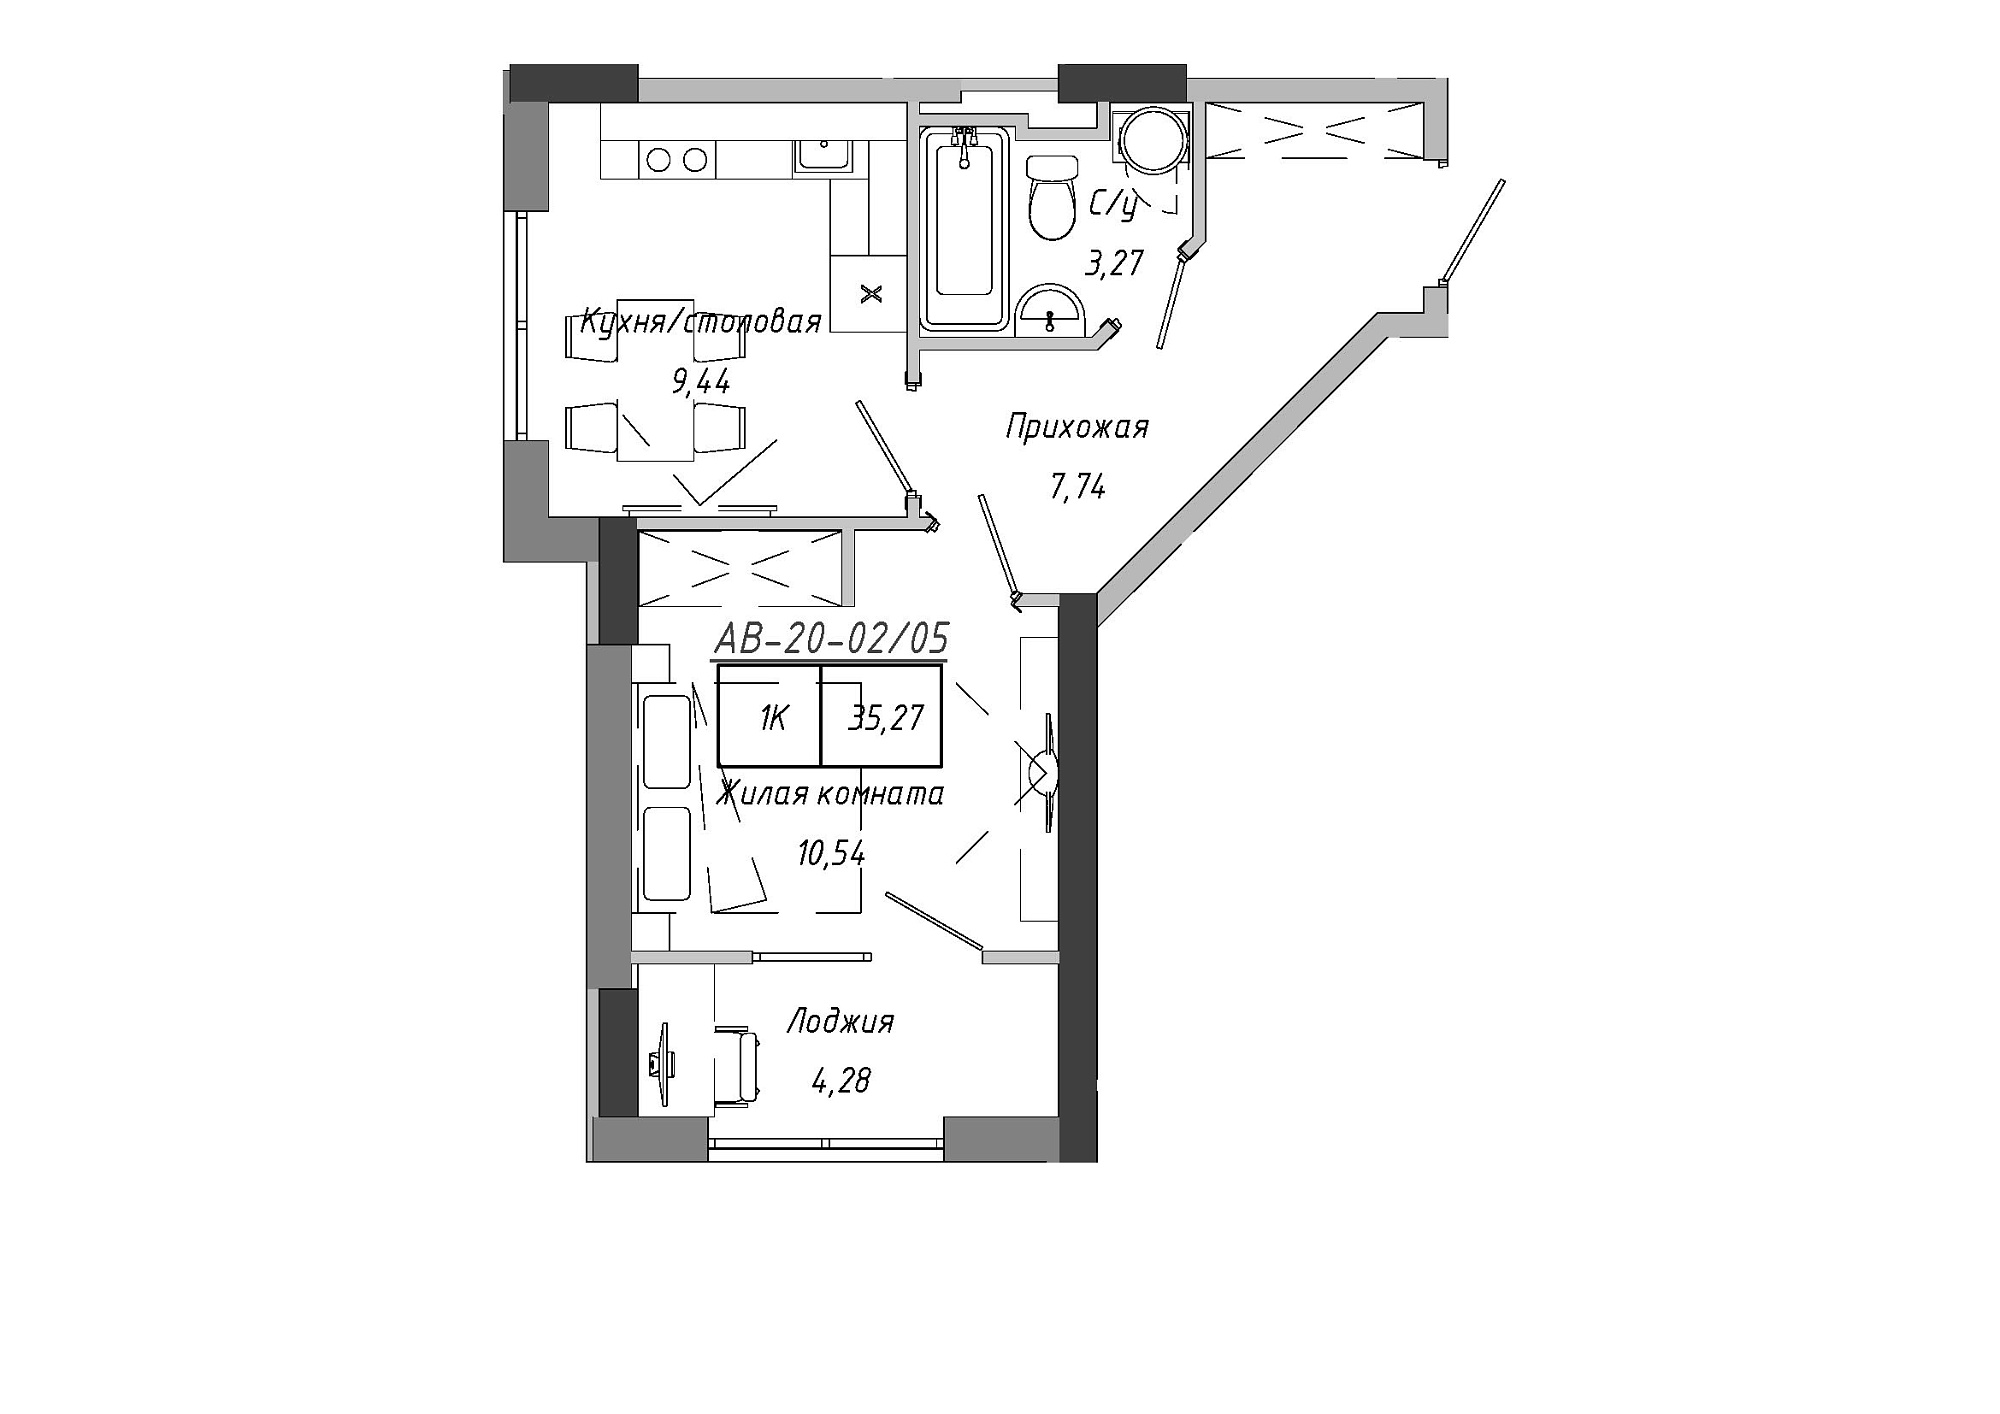 Planning 1-rm flats area 35.27m2, AB-20-02/00005.